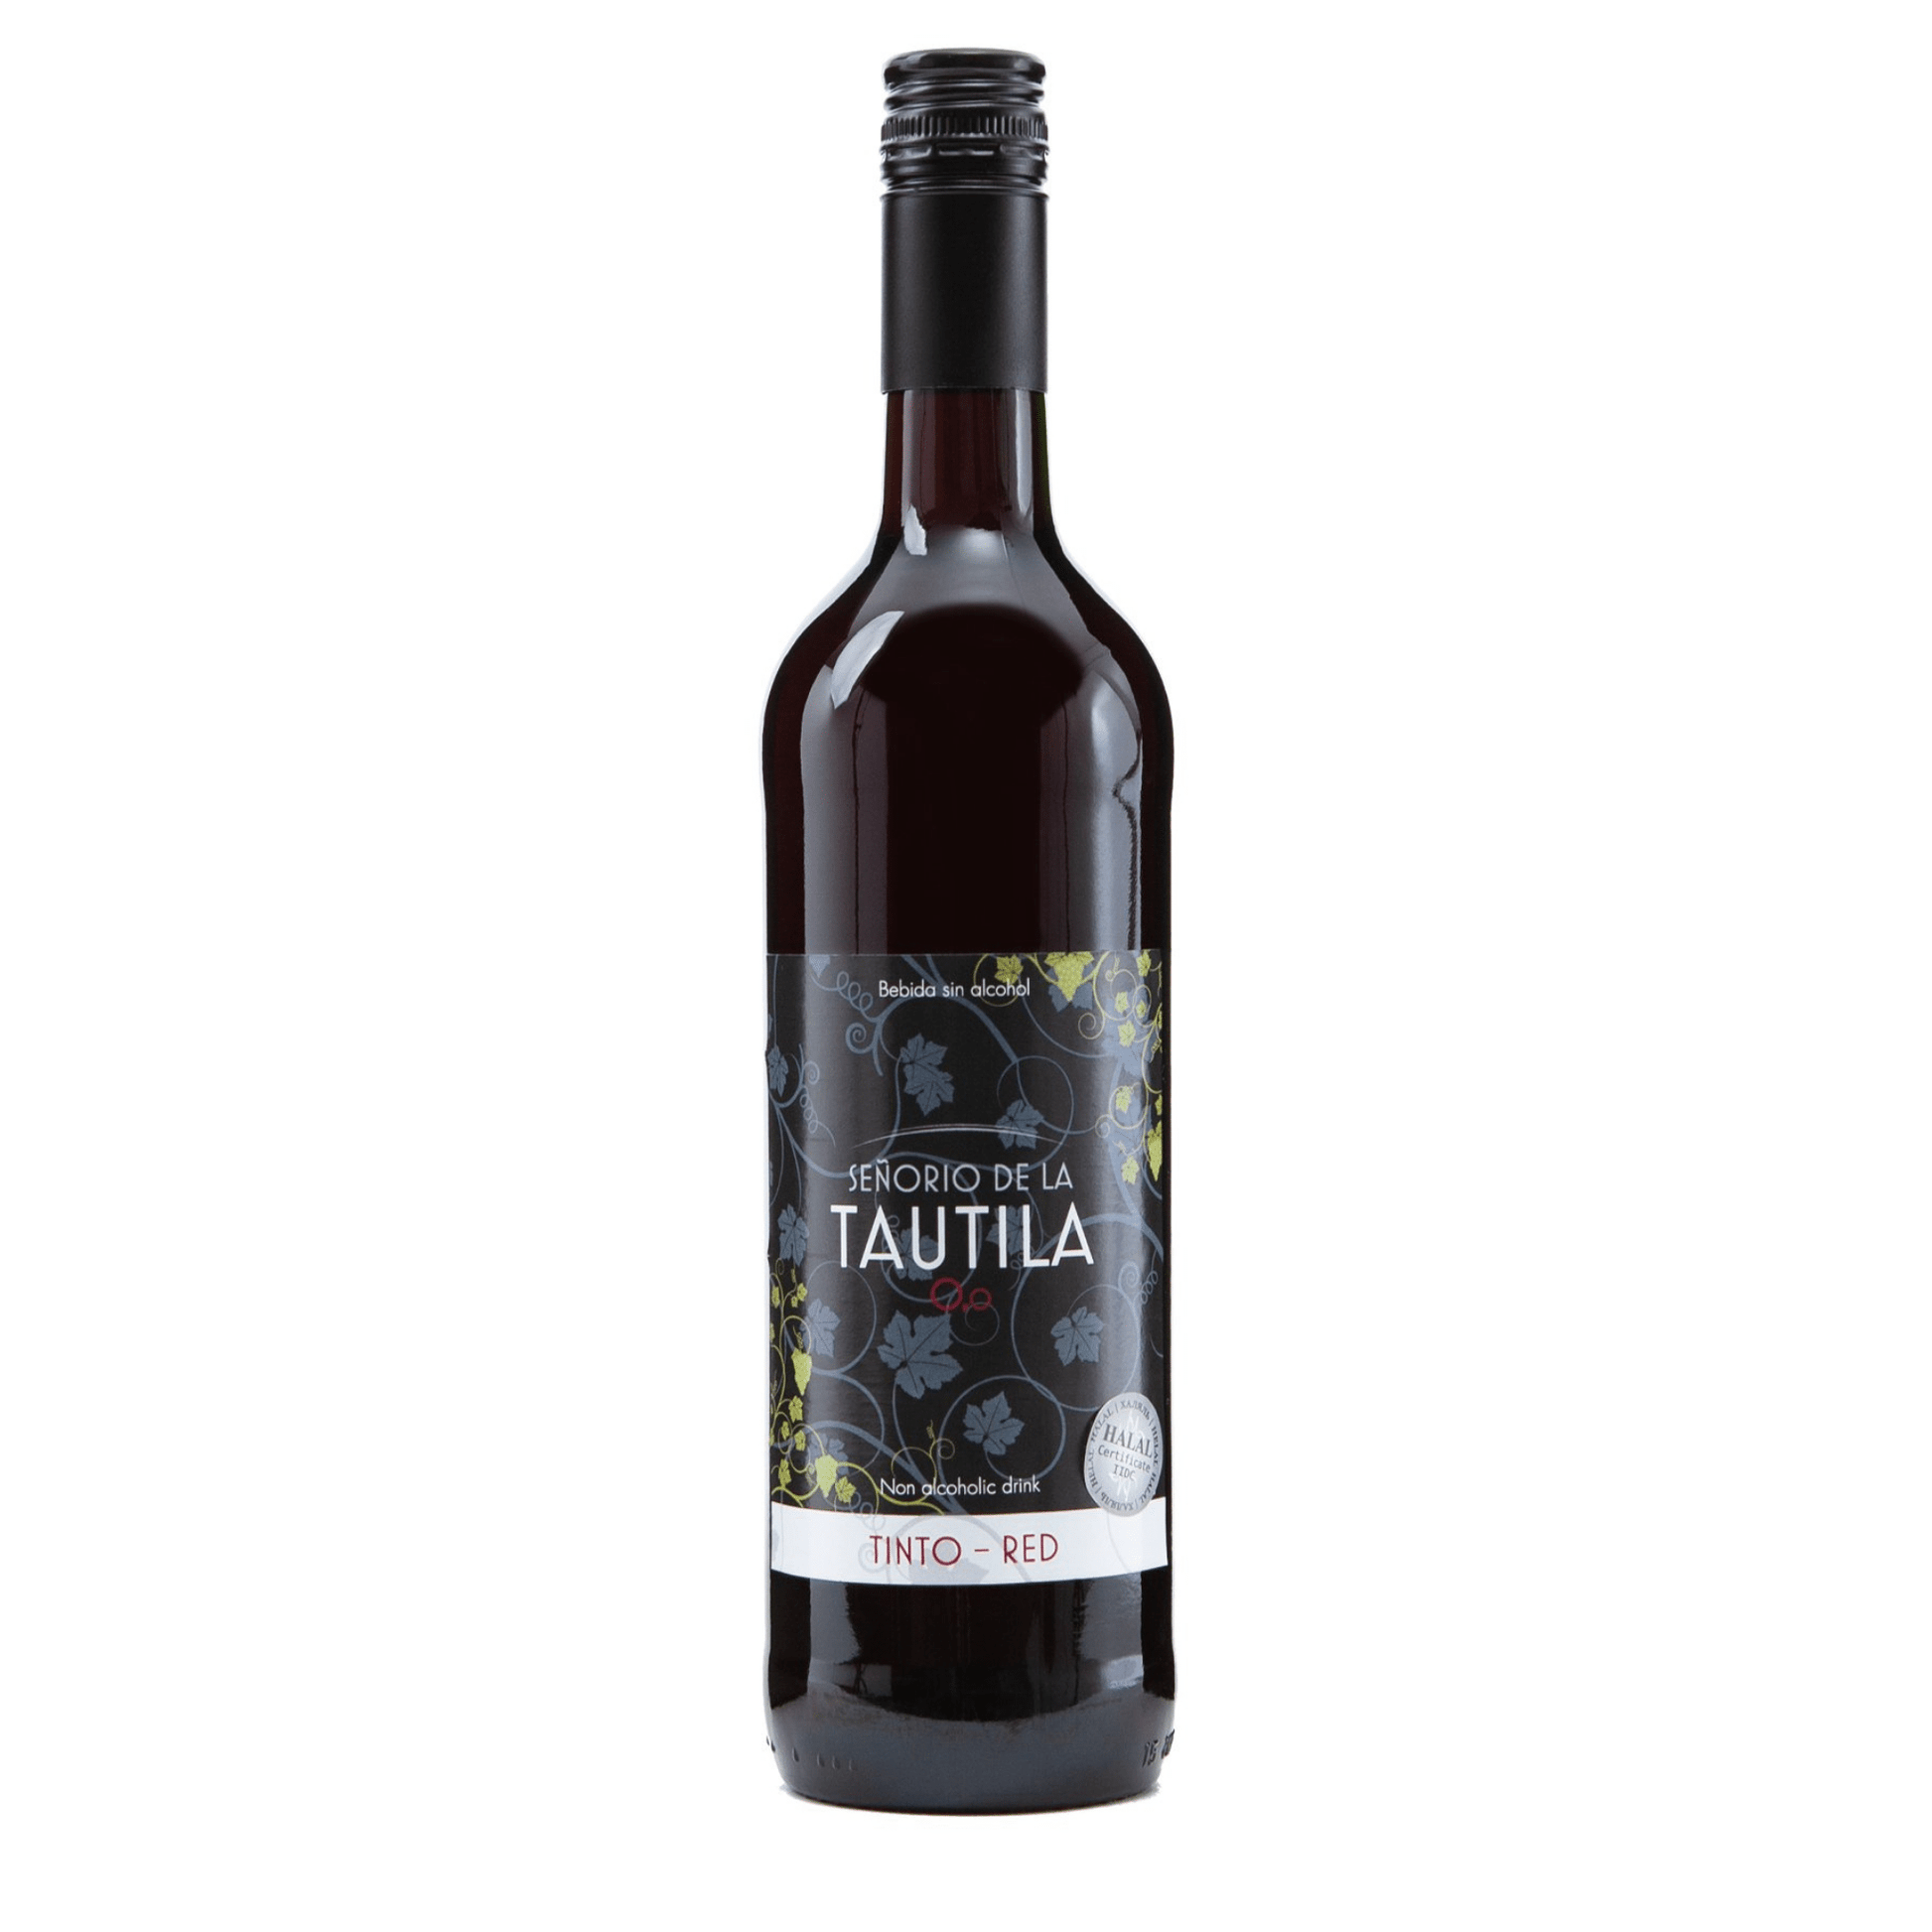 Tautila Tinto - Full Bodied 0% - Guiltless Wines